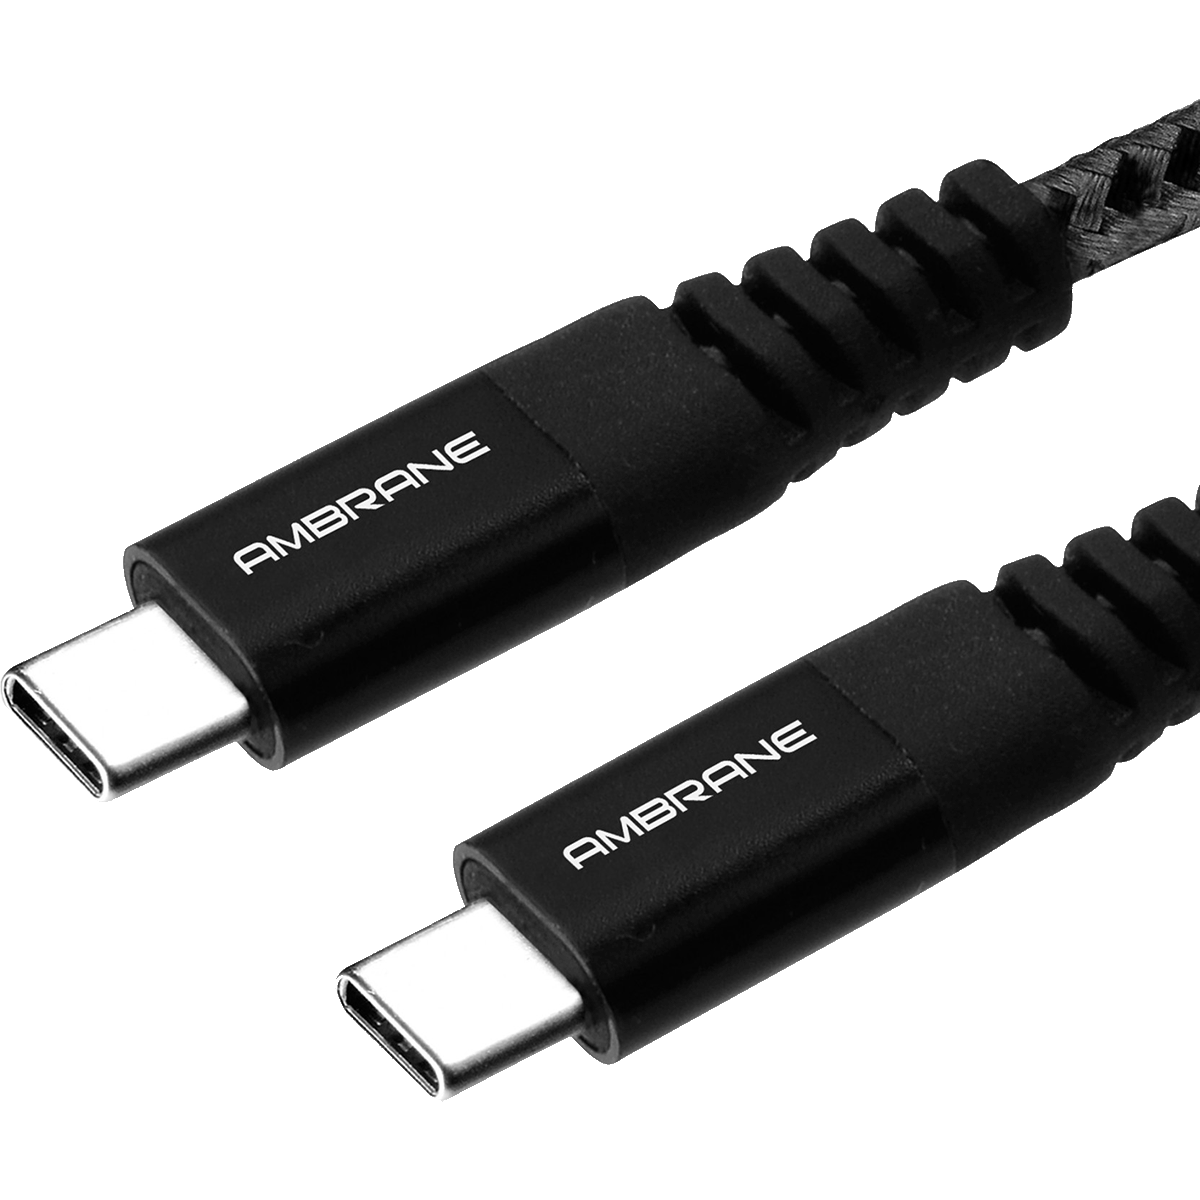 ambrane - ambrane Braided 1.5 meters USB Type-C to USB Type-C Data Transfer and Charging Cable (RCTT-15, Black)